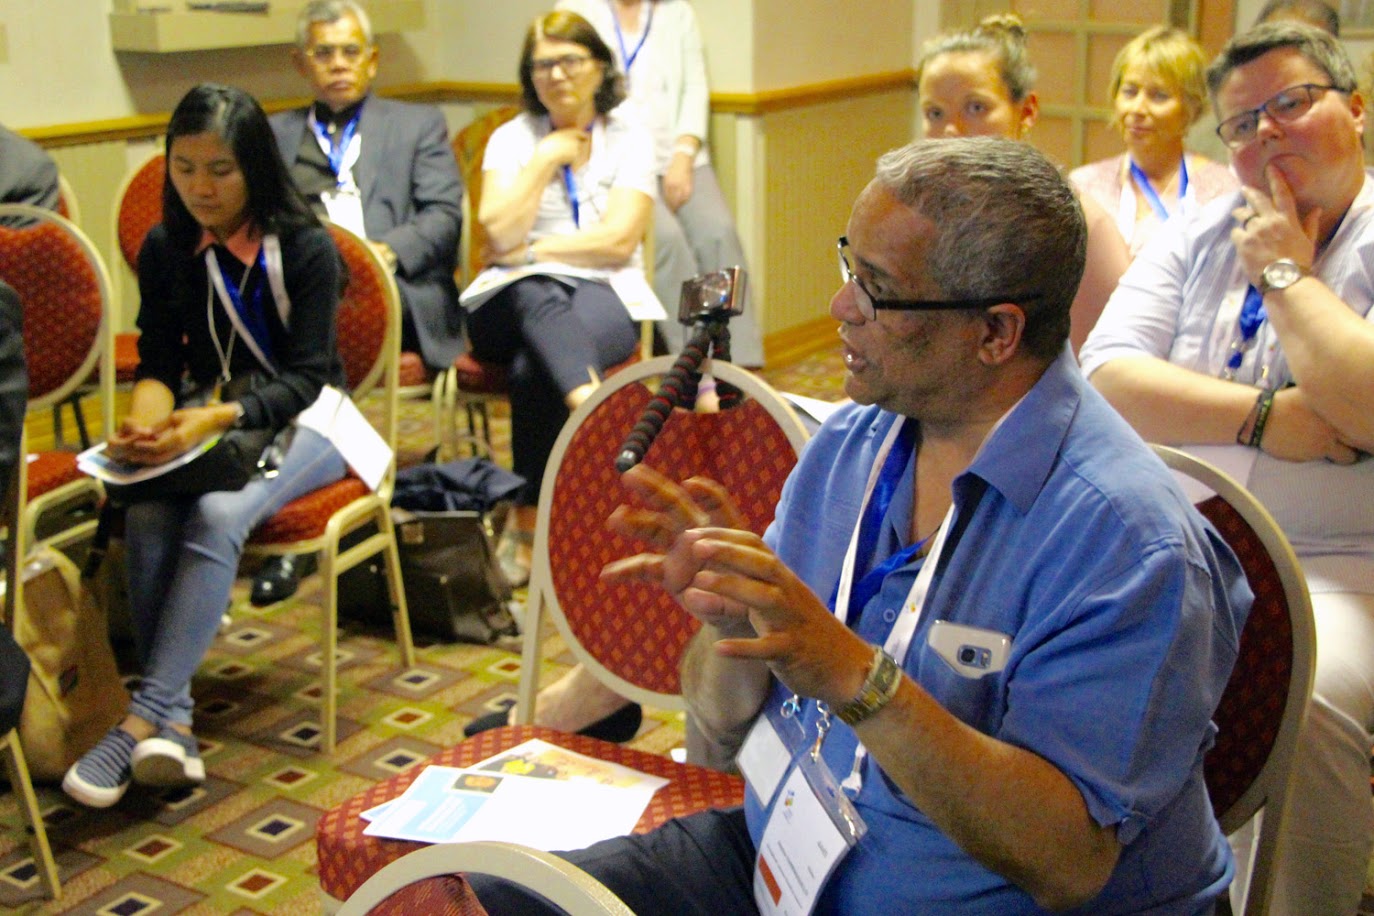 Mr. Hector Carrasquillo from America raising a concern during the Omatala workshop – Enhancing Dialogue and Cooperation: The LWF Interfaith Network. Photo: LWF/S. Lawrence